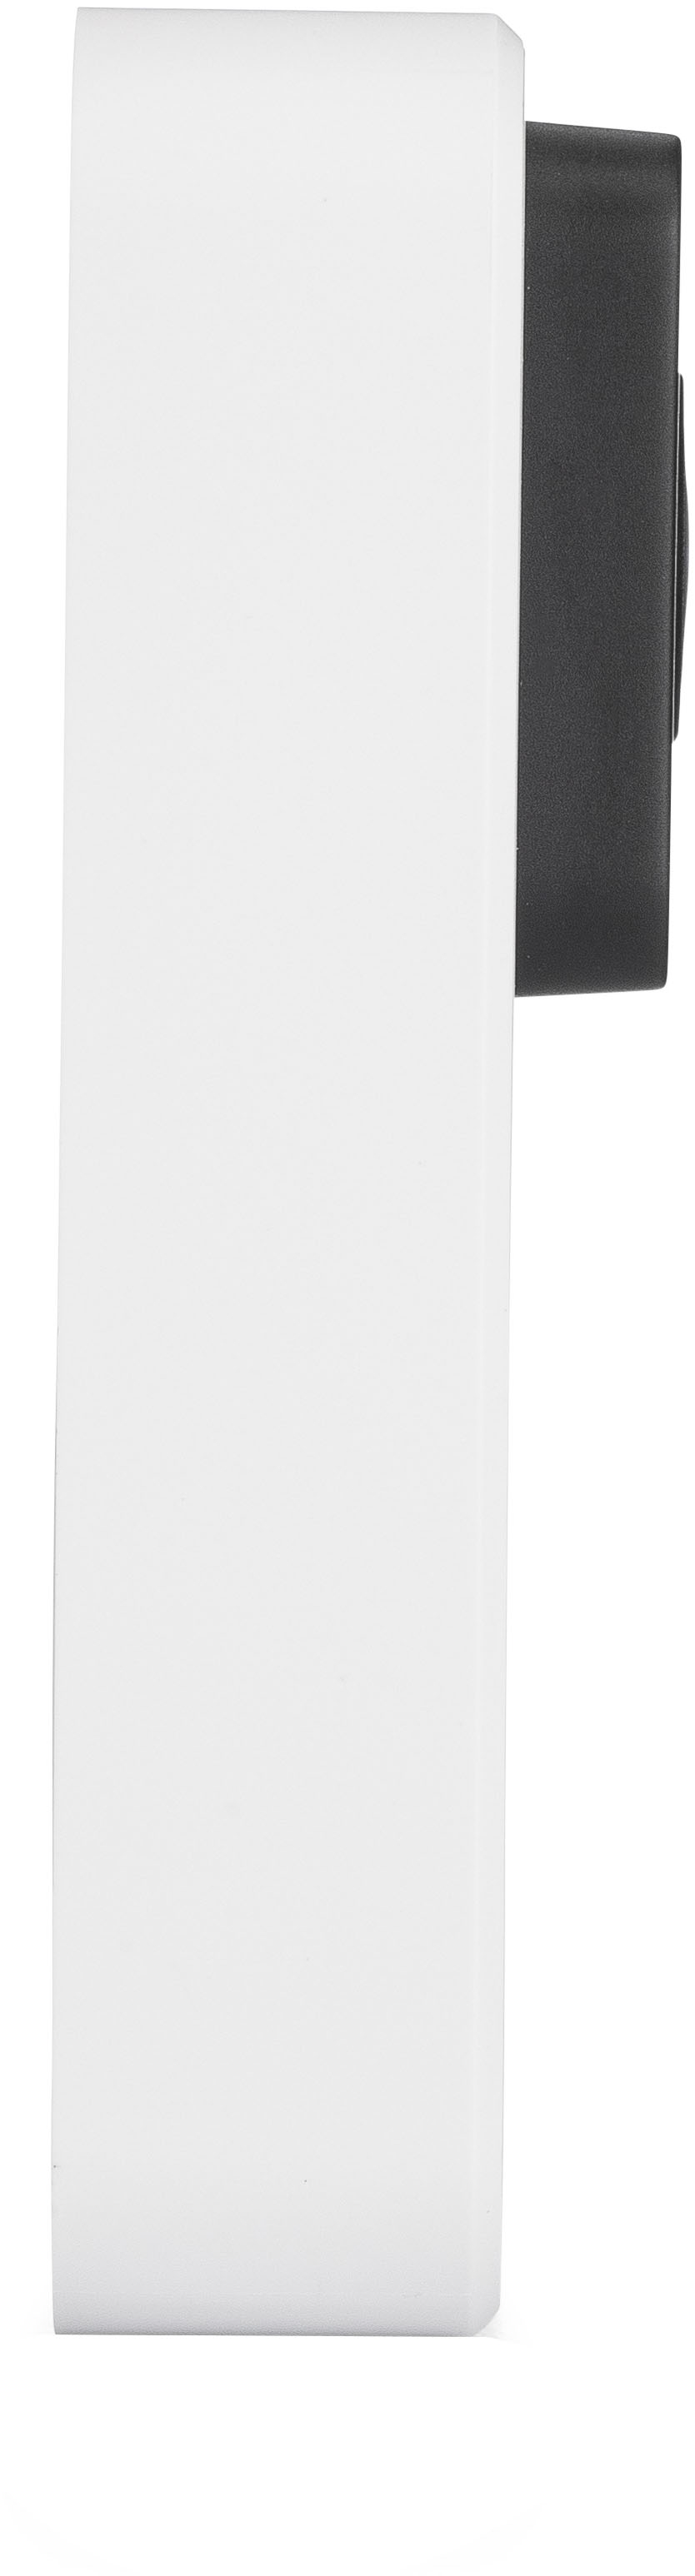 Left View: Wyze - Video Doorbell Wired (Horizontal Wedge Included) 1080p HD Video with 2-Way Audio - White